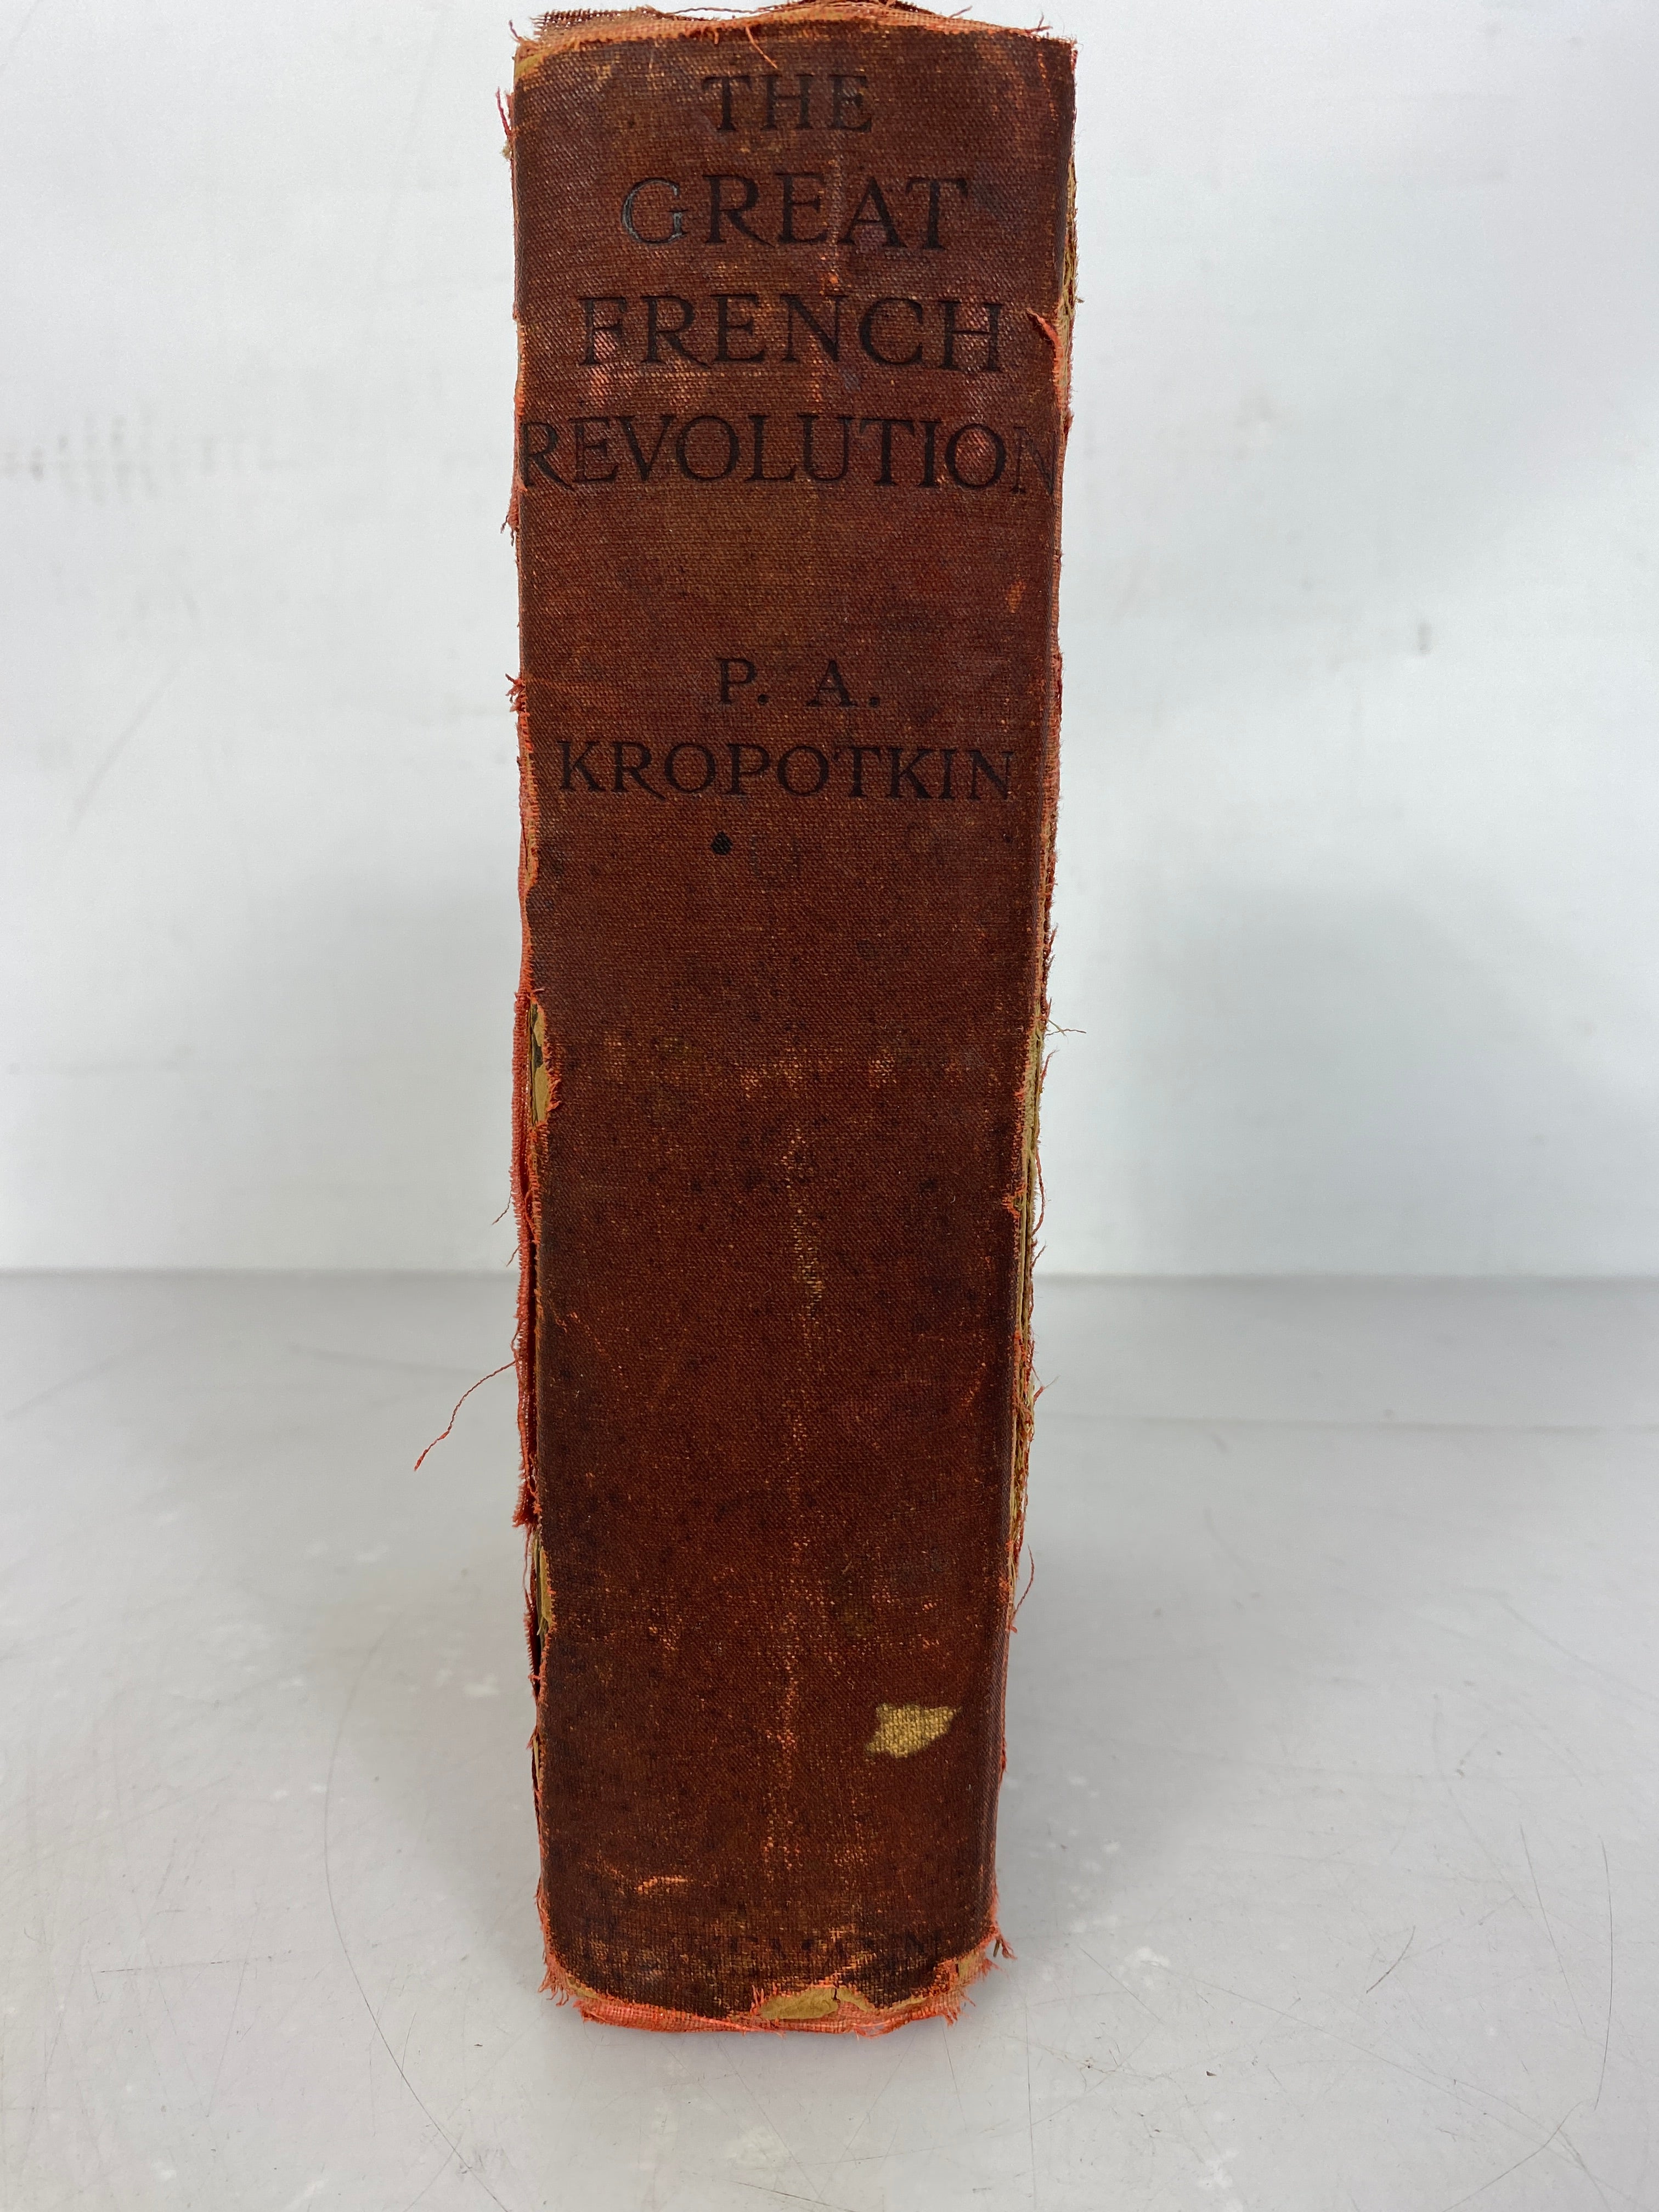 The Great French Revolution 1789-1793 by P.A. Kropotkin 1909 HC